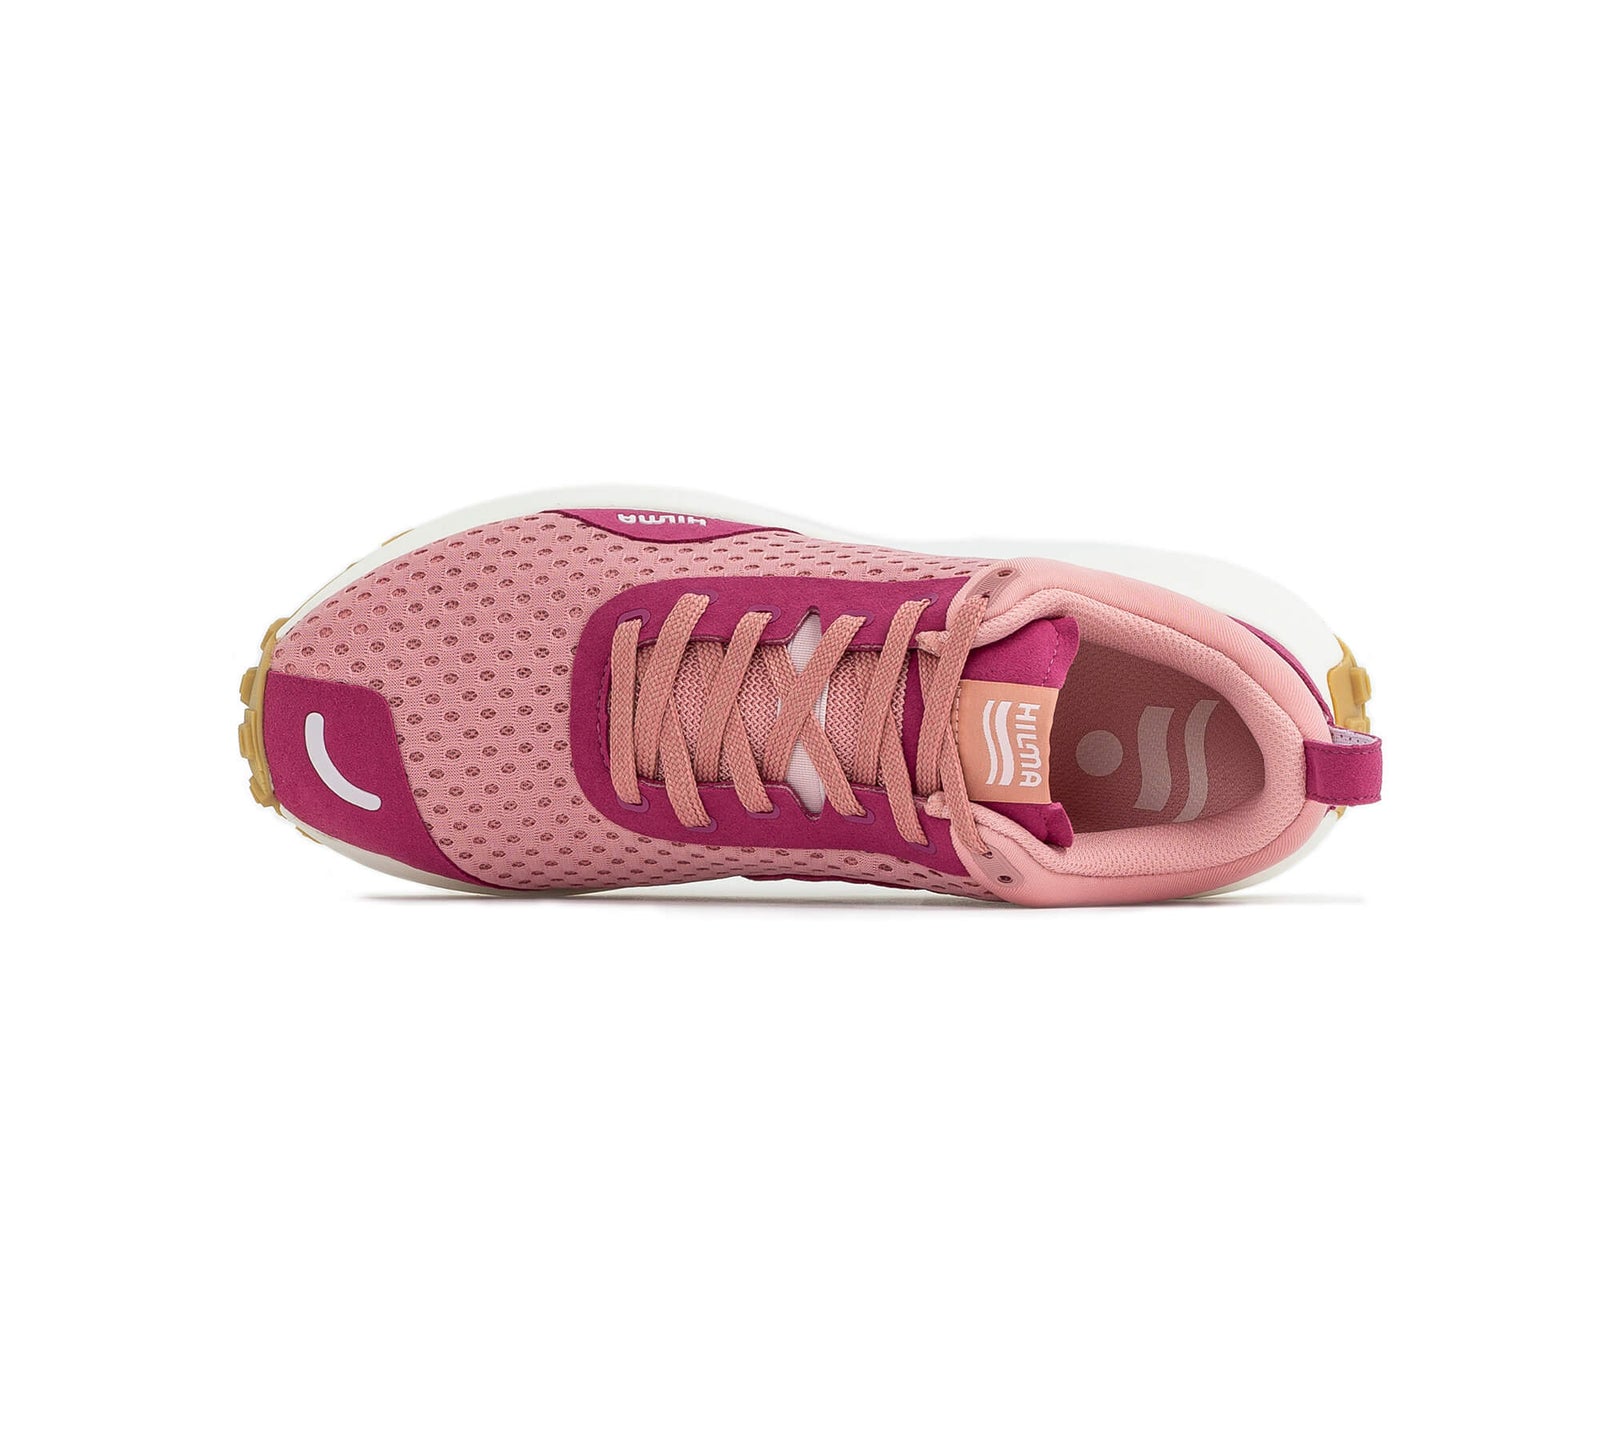 Top down view of right Everywhere Hilma Running shoe in Rose Tan